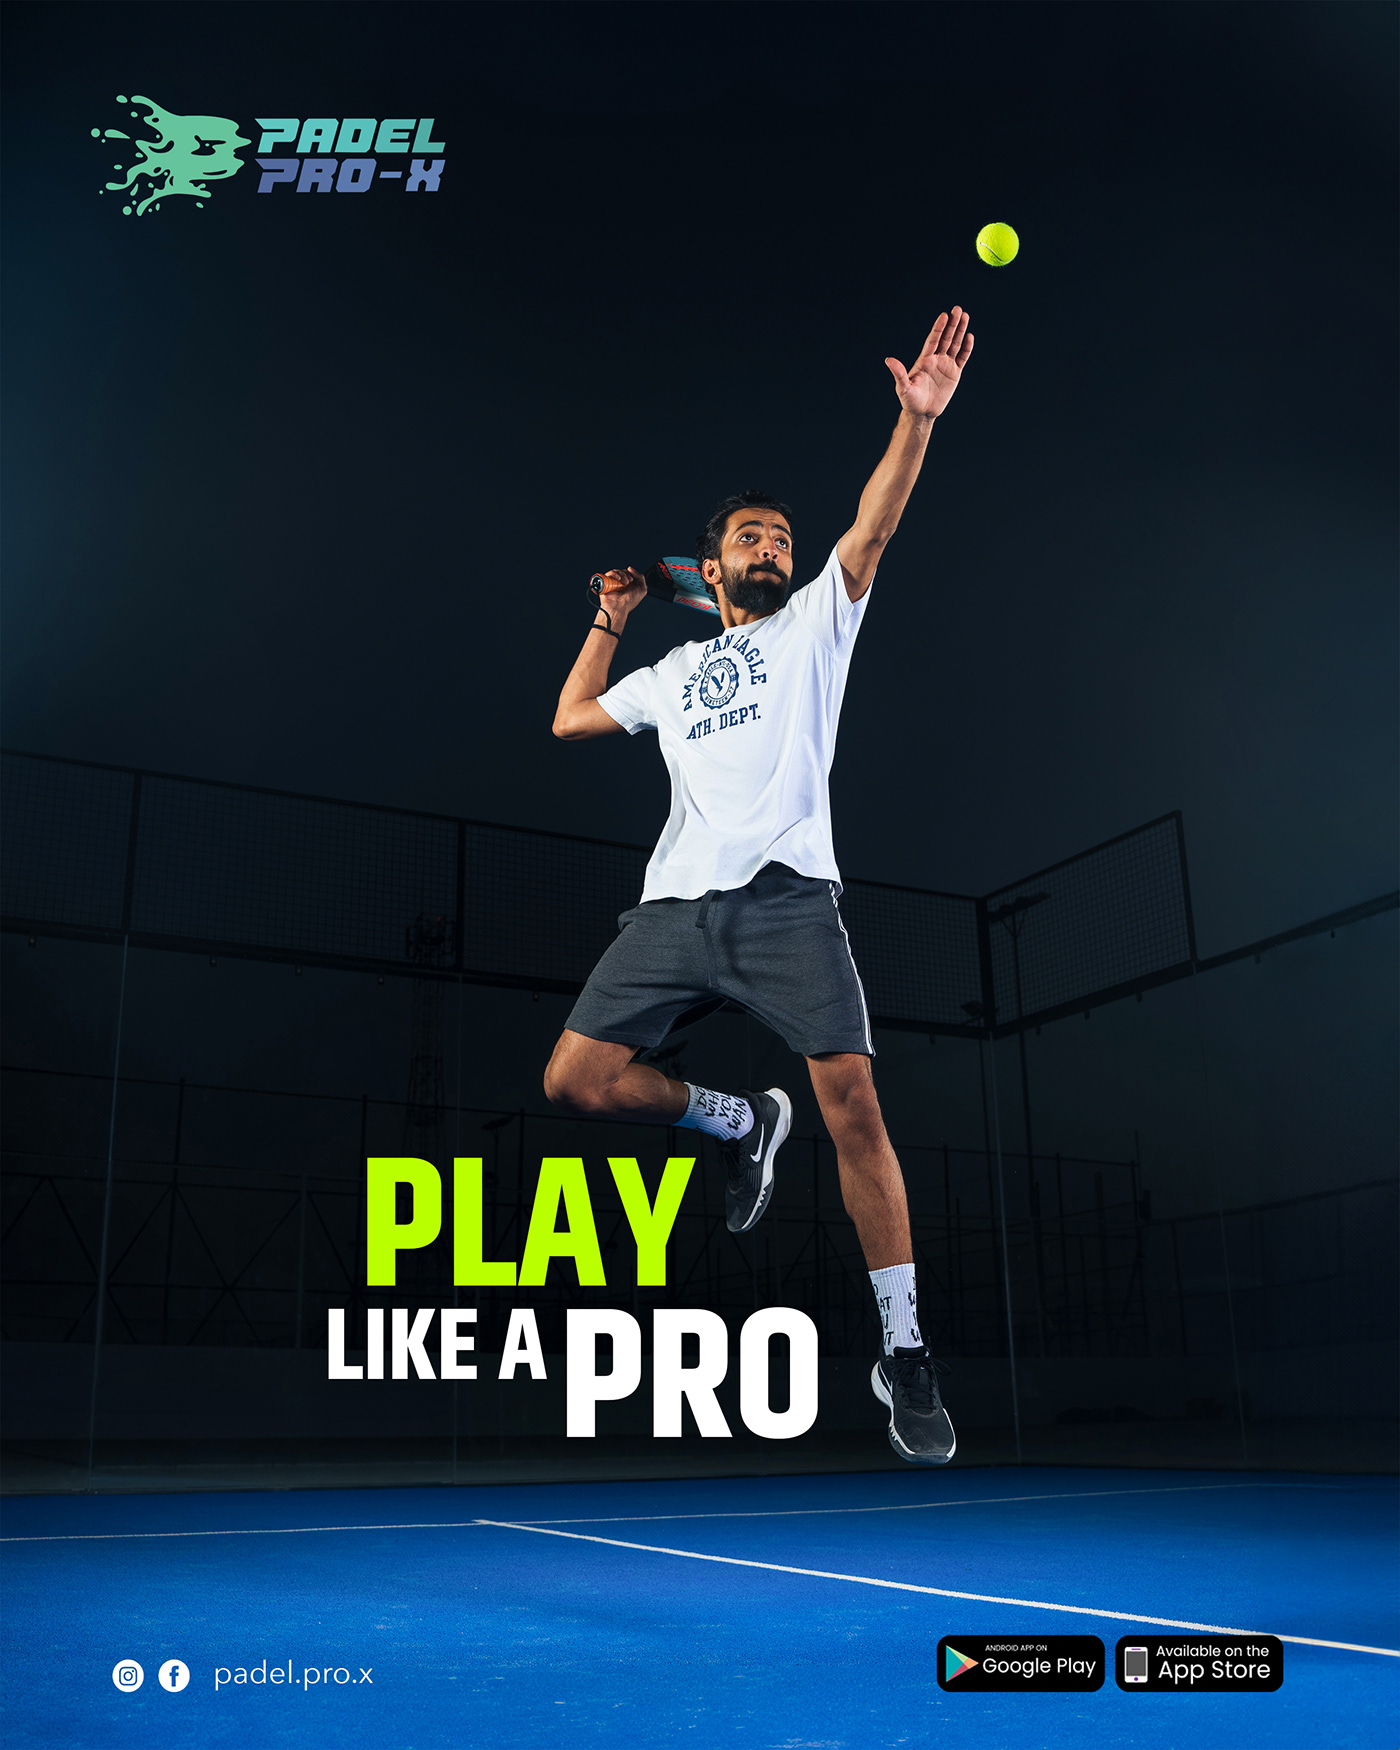 Sports Equipment sports Padel Padel tennis Sports Design Social media post ActionPhotography Motionphotography